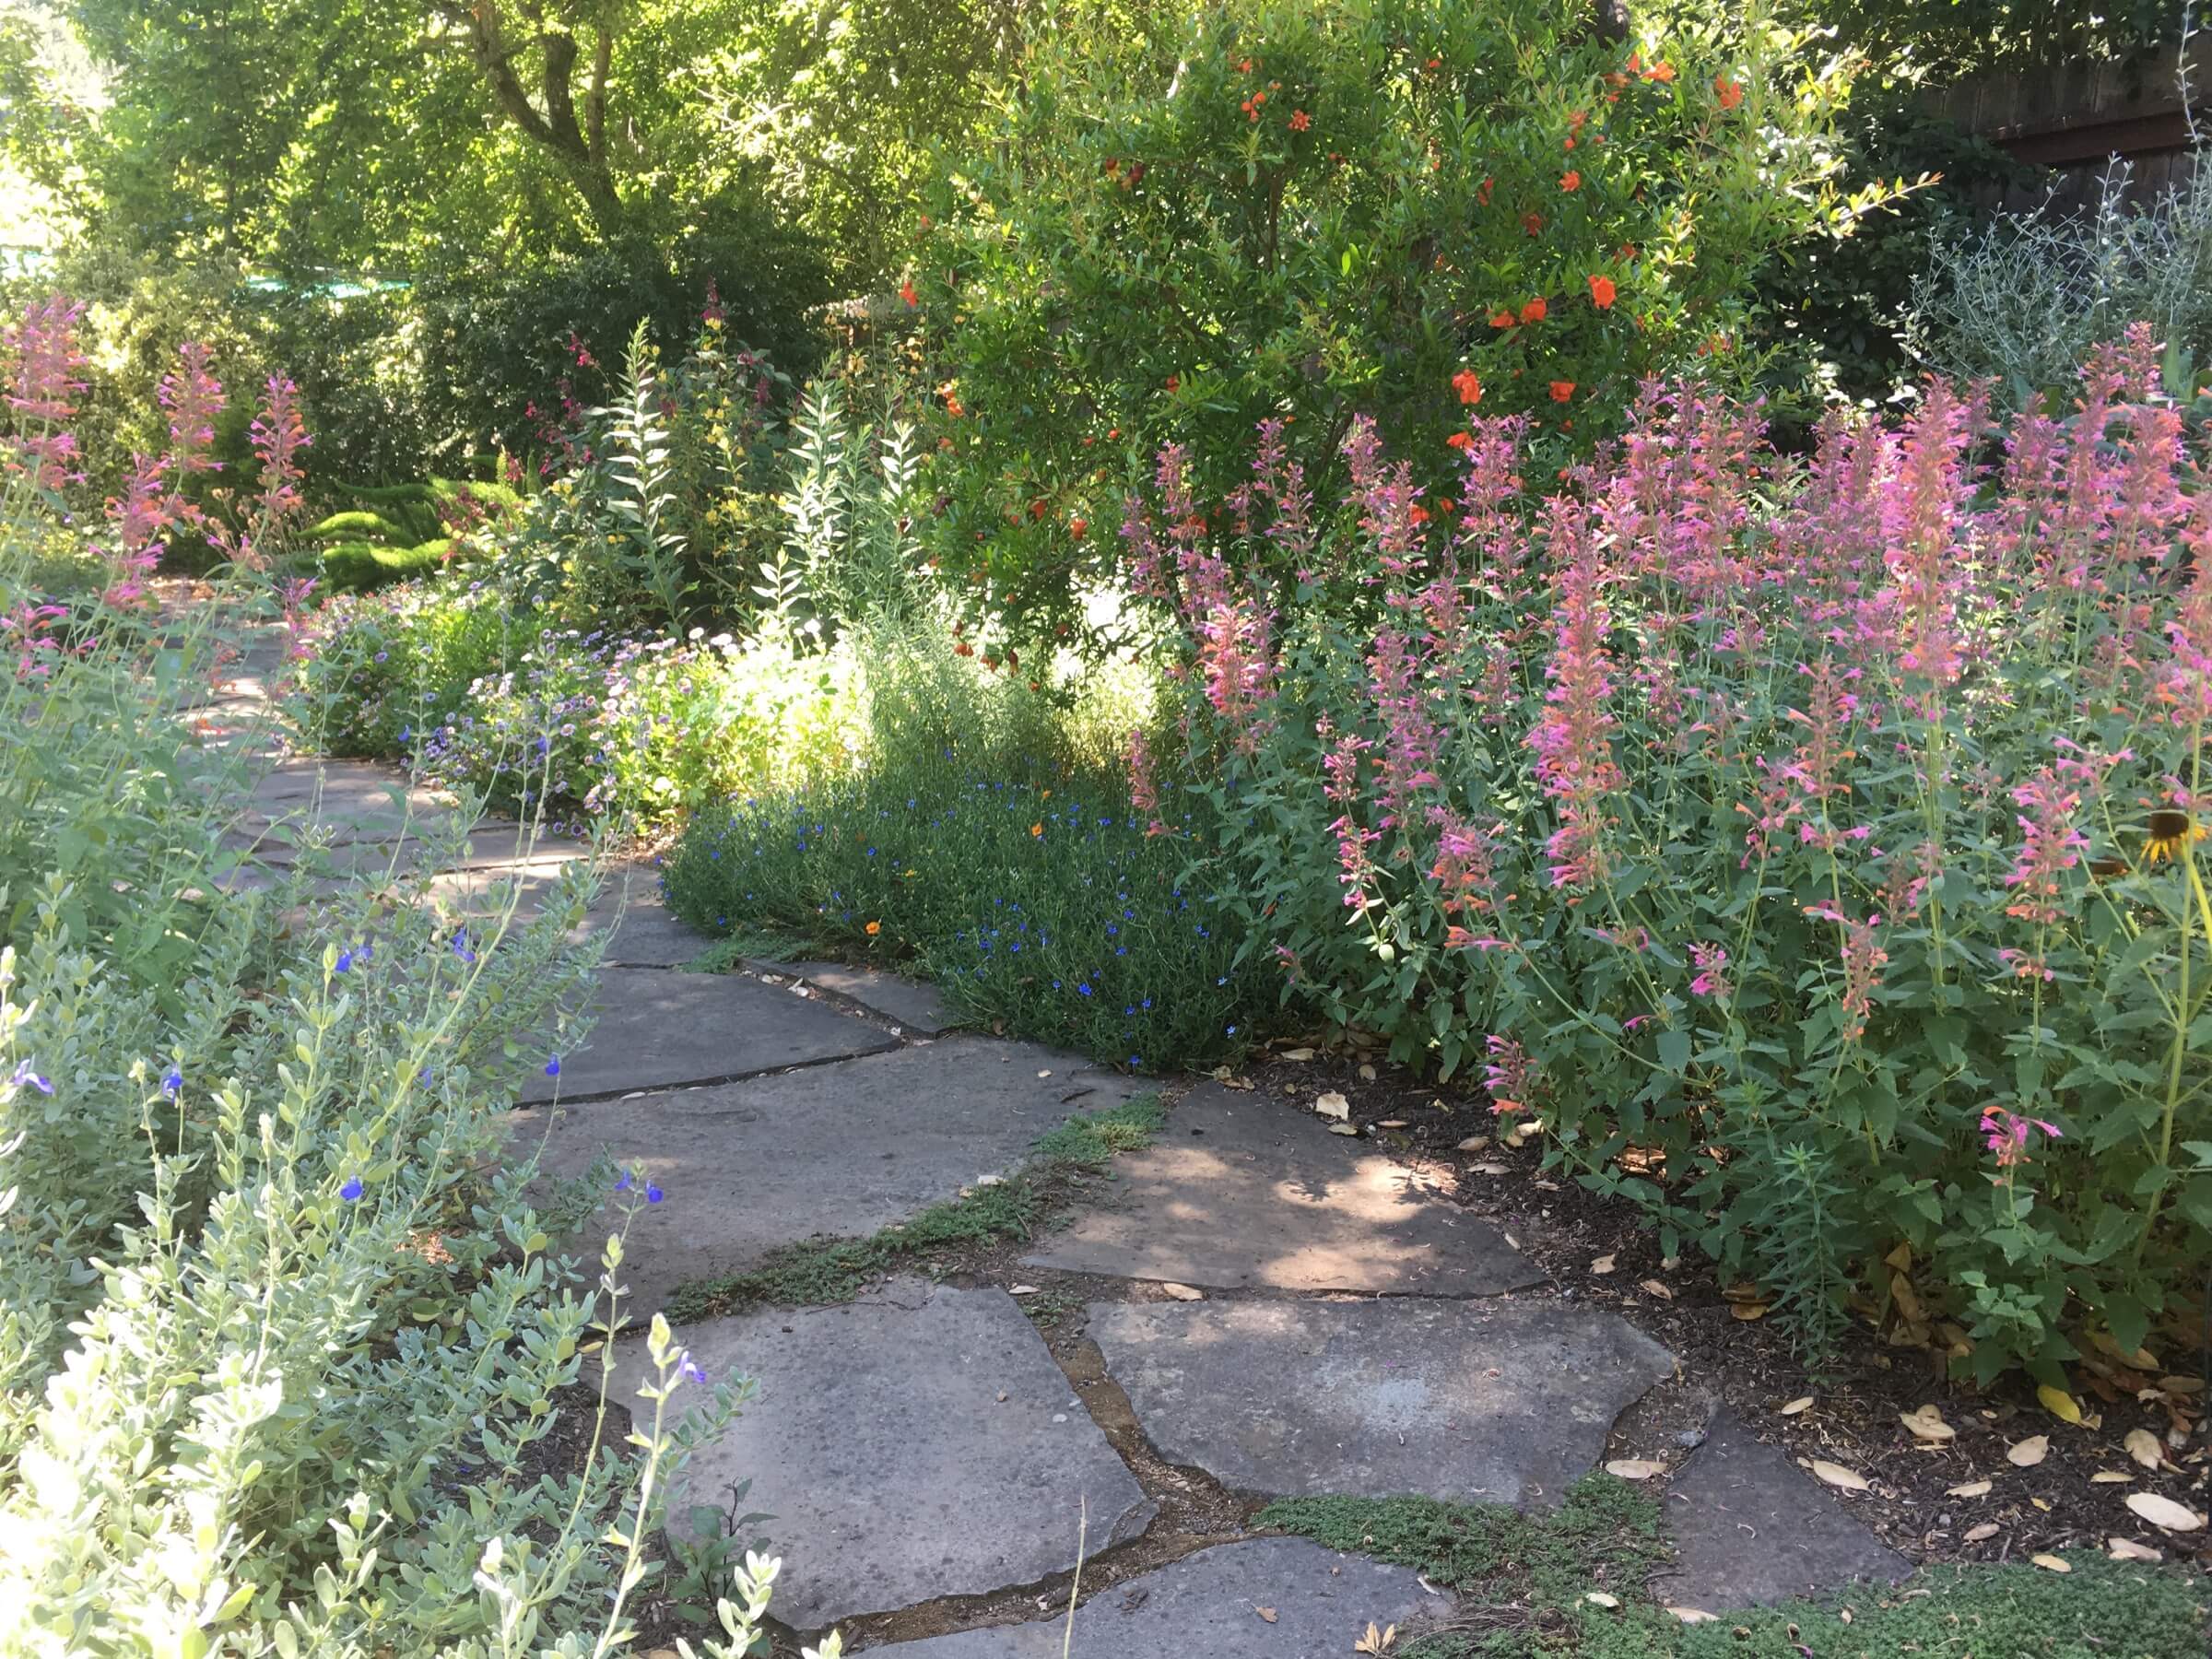 Hummingbird mint and Salvias provide nectar for bees and hummingbirds